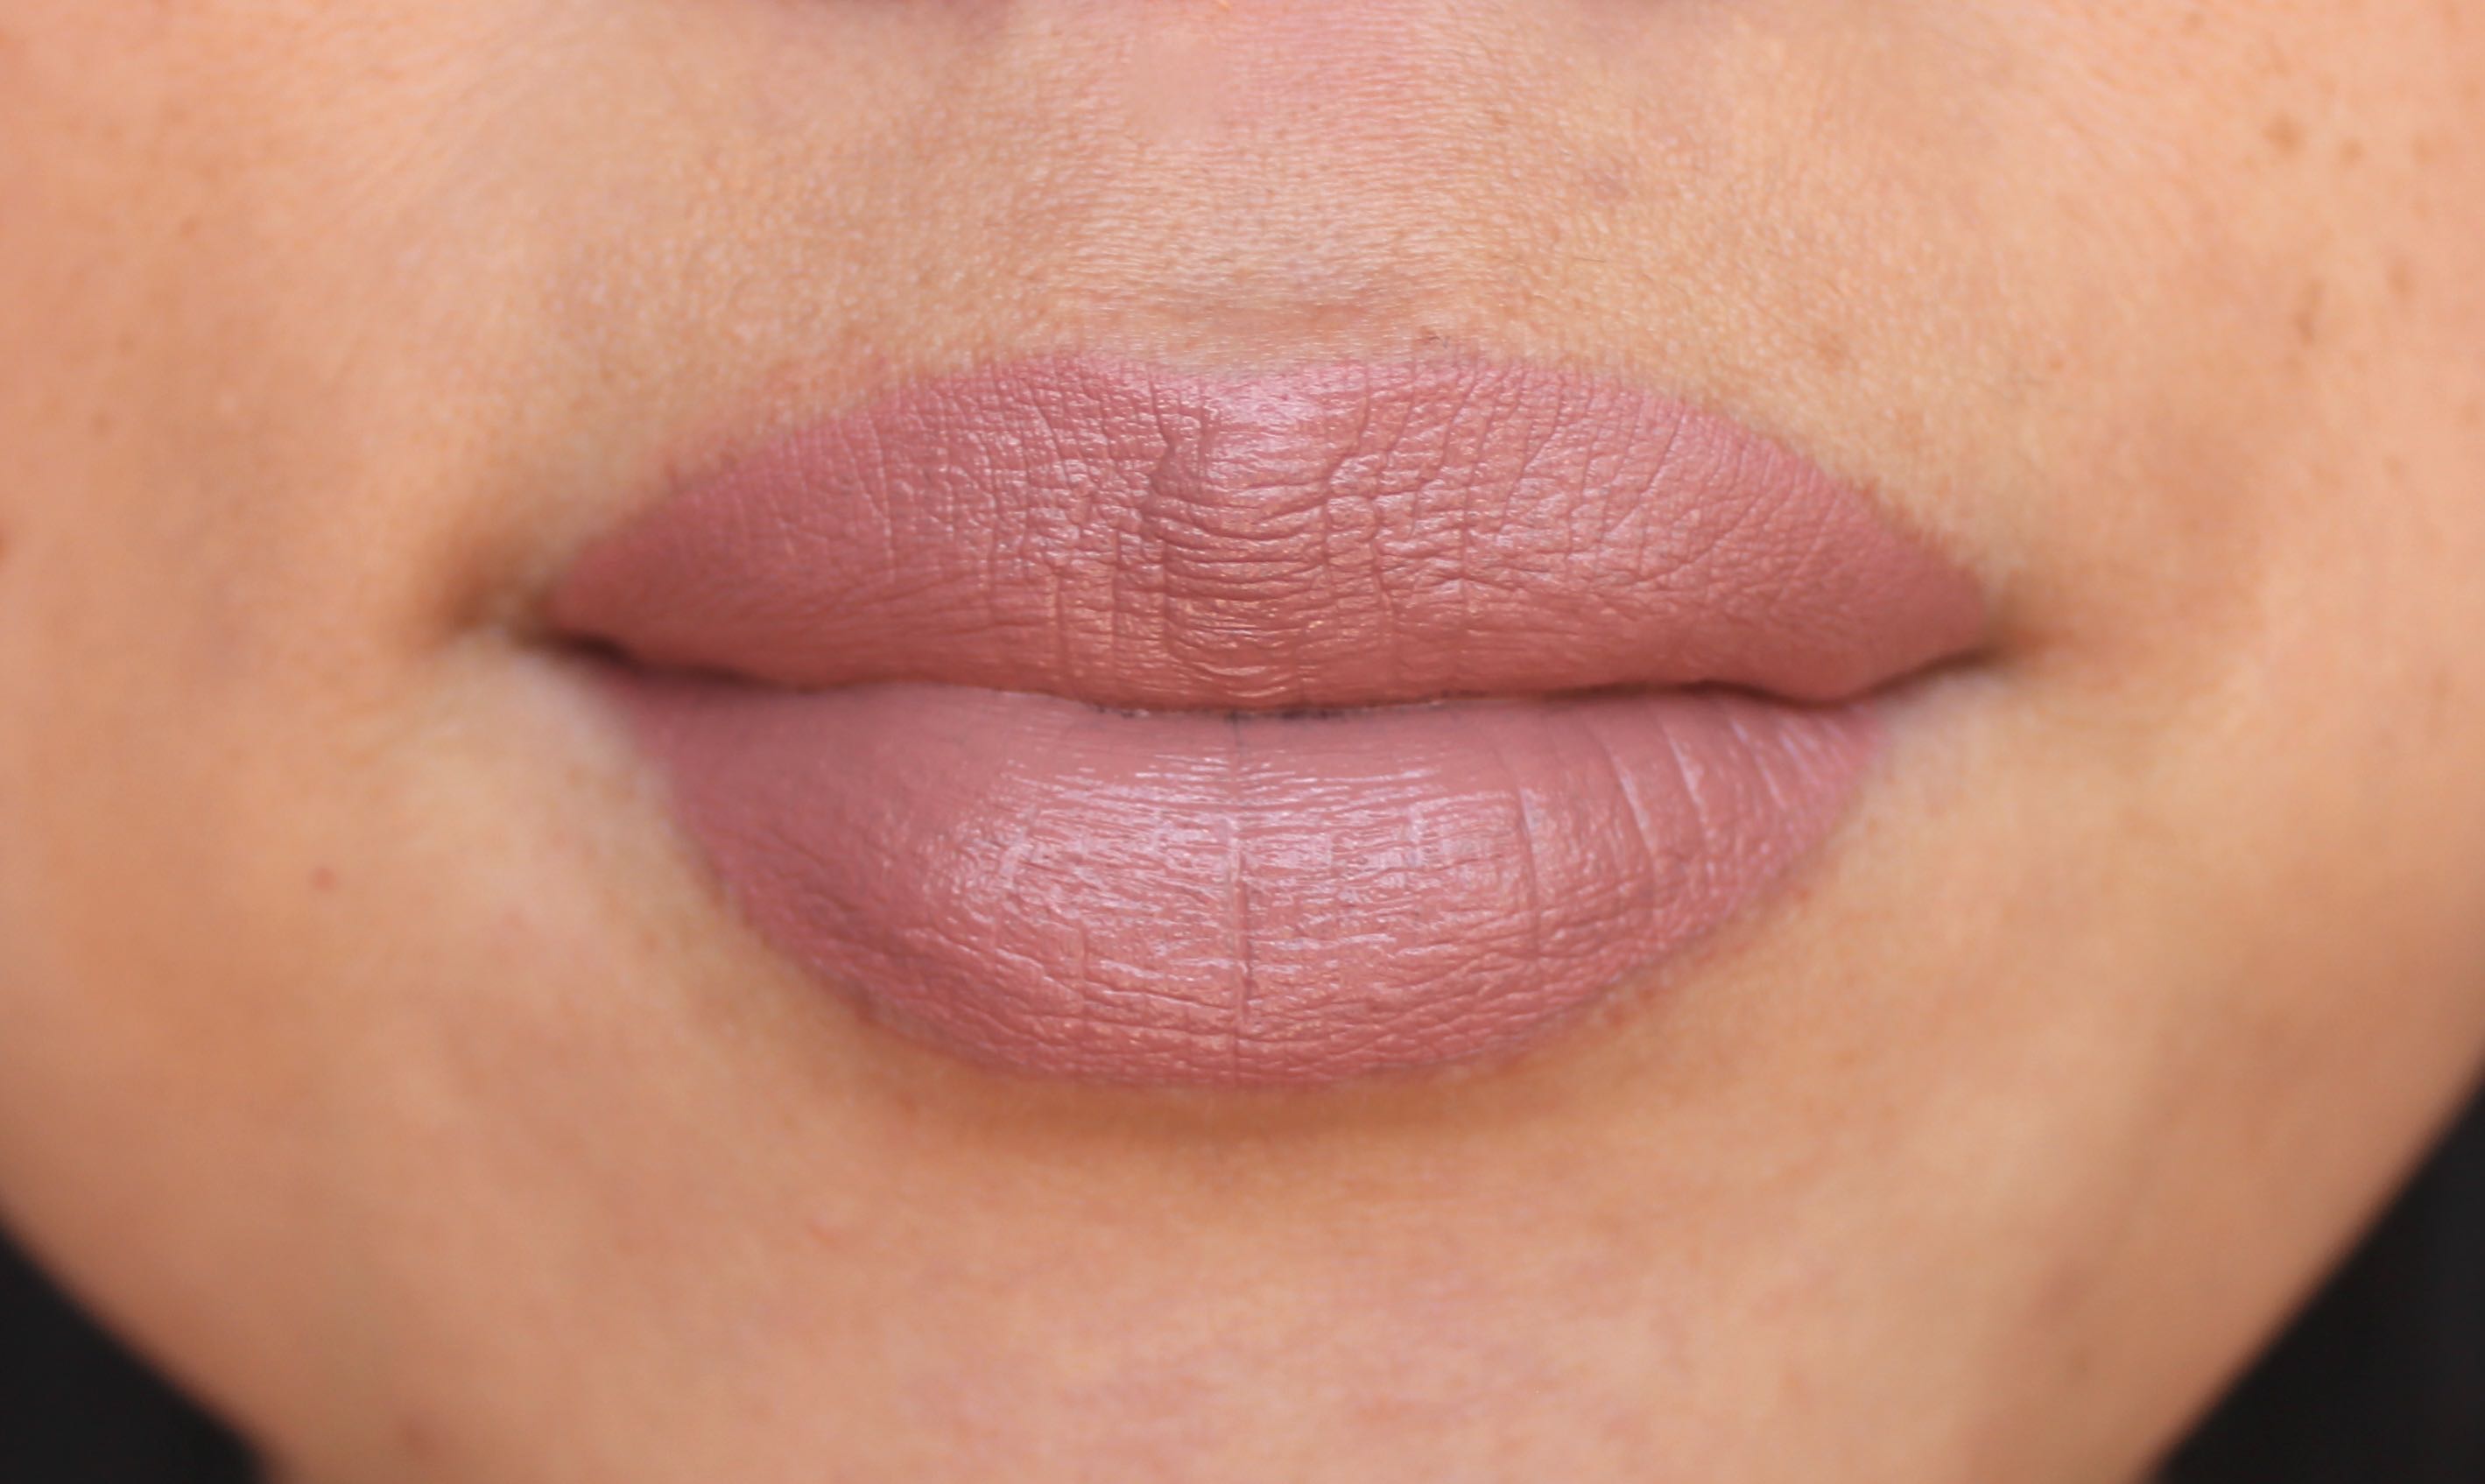 Nars Audacious Lipstick Review & Swatches by Facemadeup.com